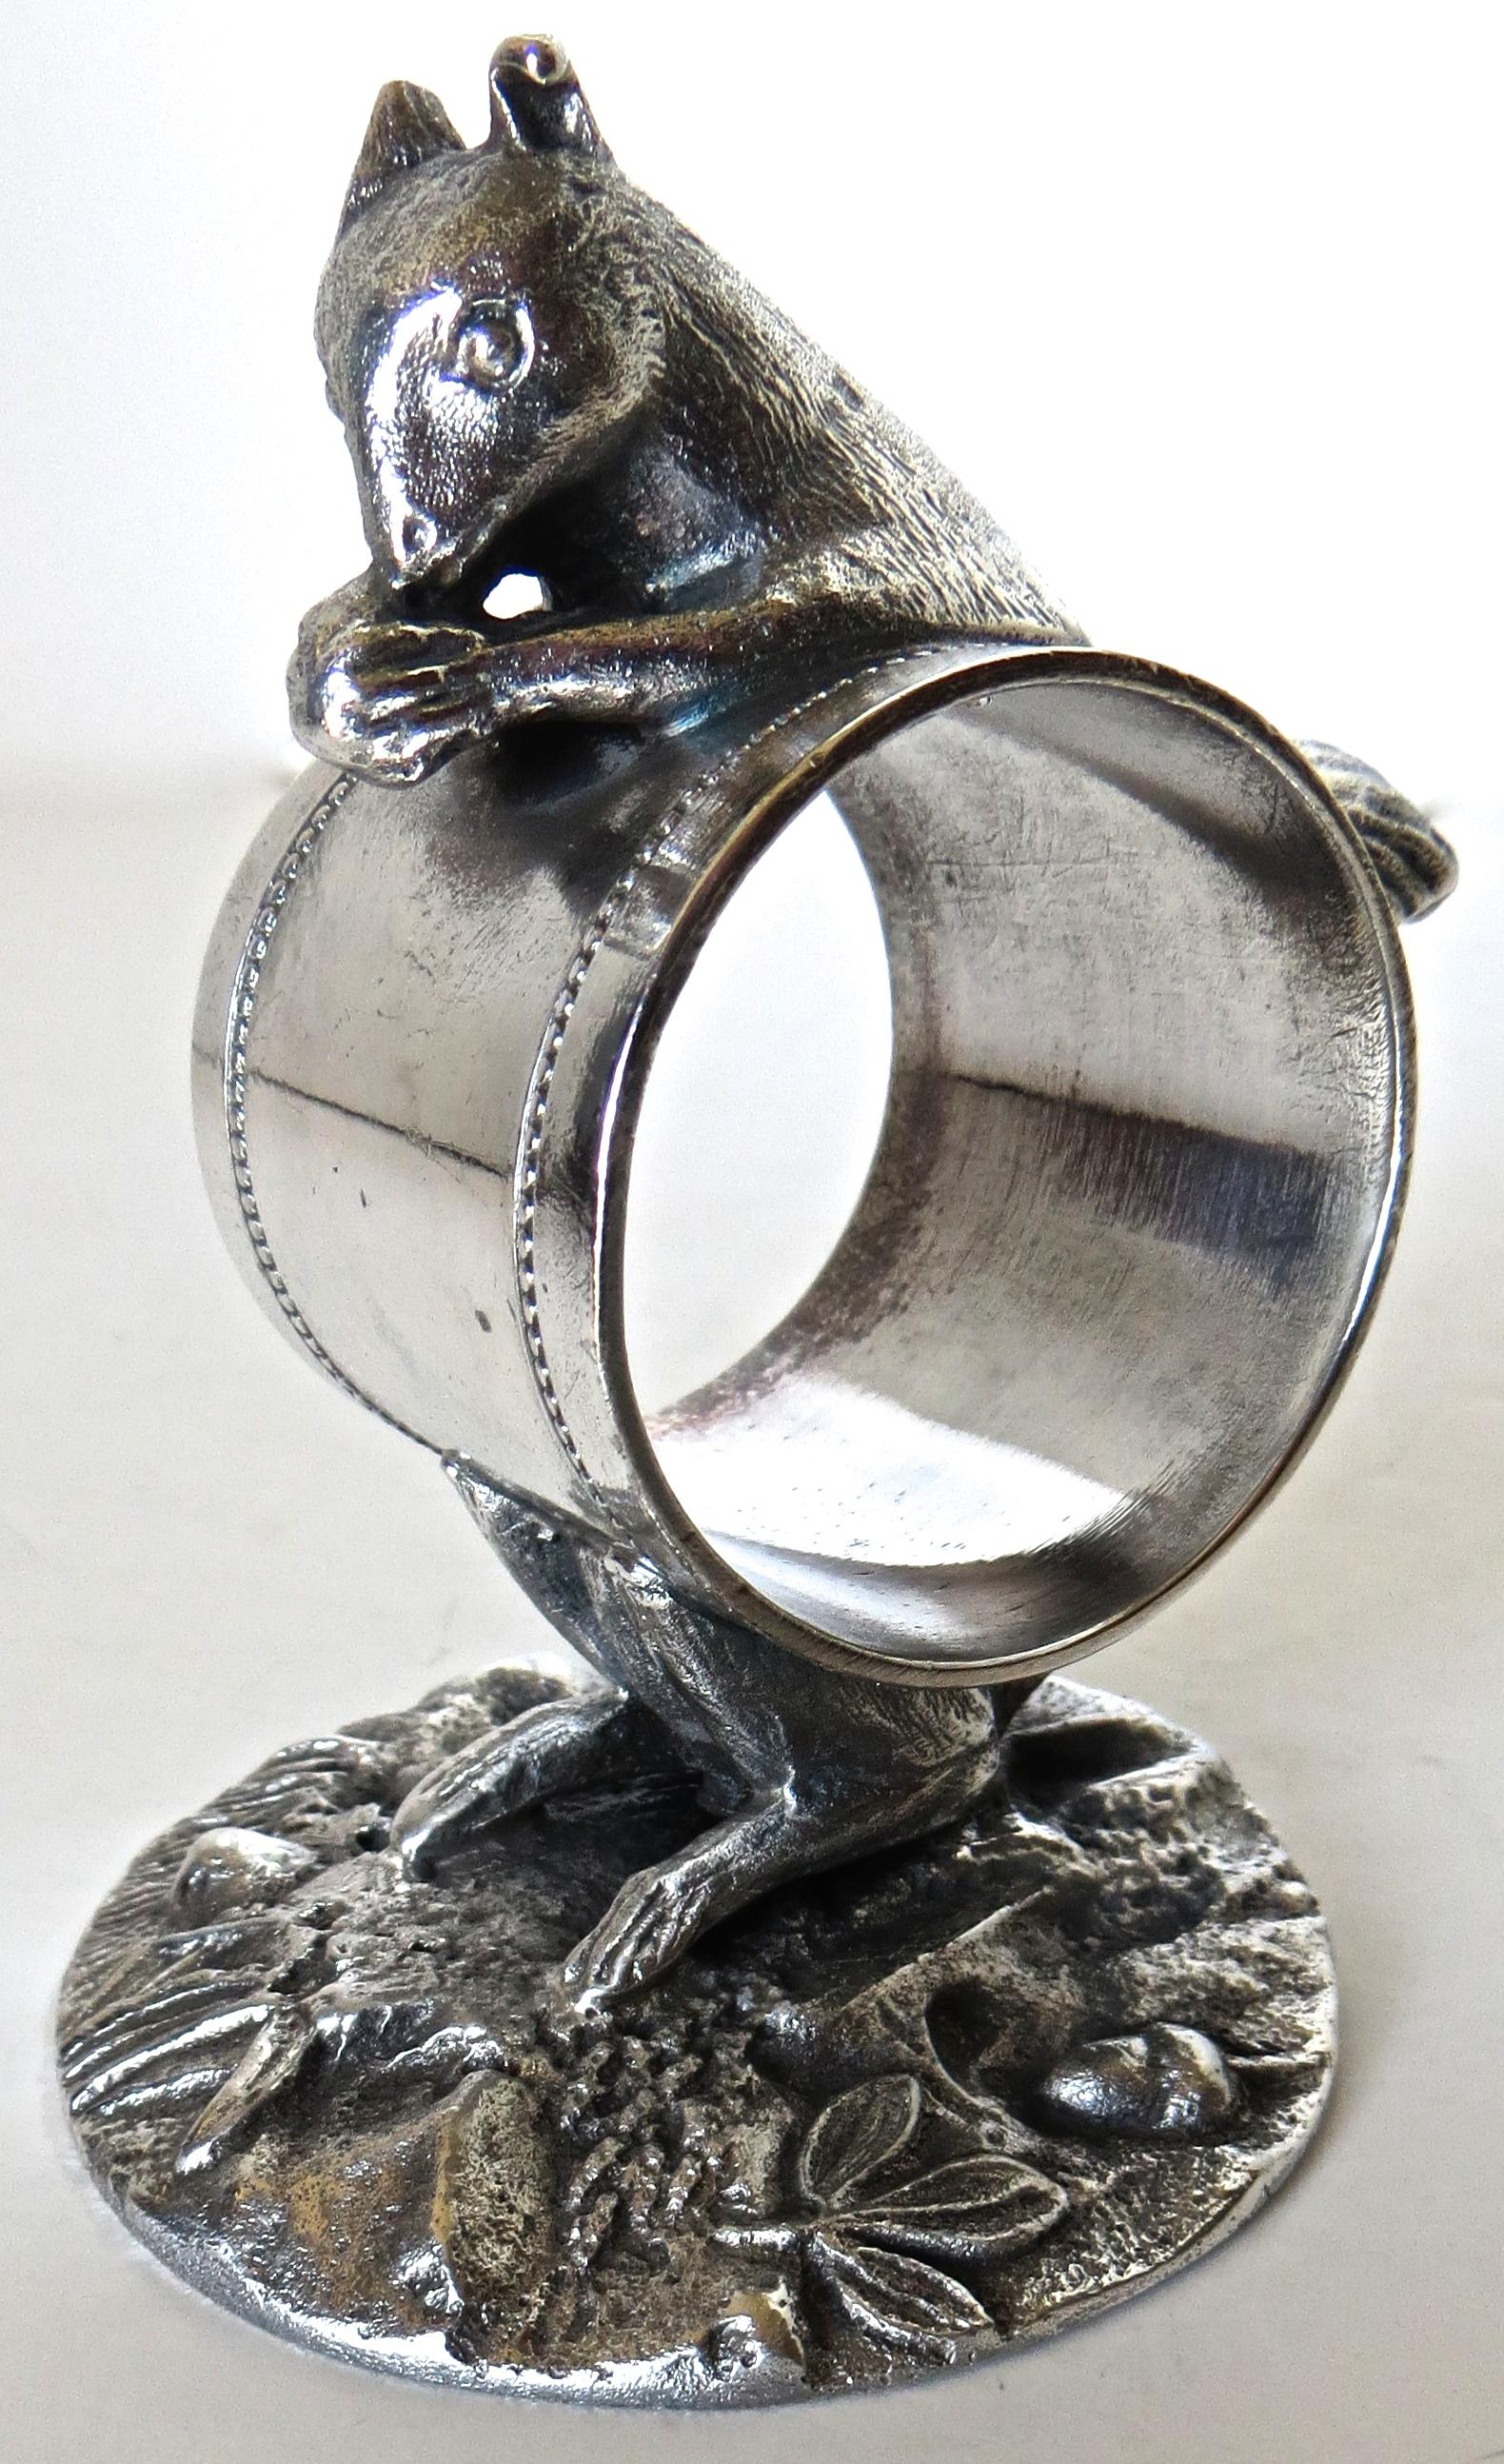 This is a much sought after Victorian silver plated figural napkin ring which depicts a squirrel eating a nut atop the ring. It is very nicely cast, depicting in great detail, the features of the squirrel and the foliage at the circular base which